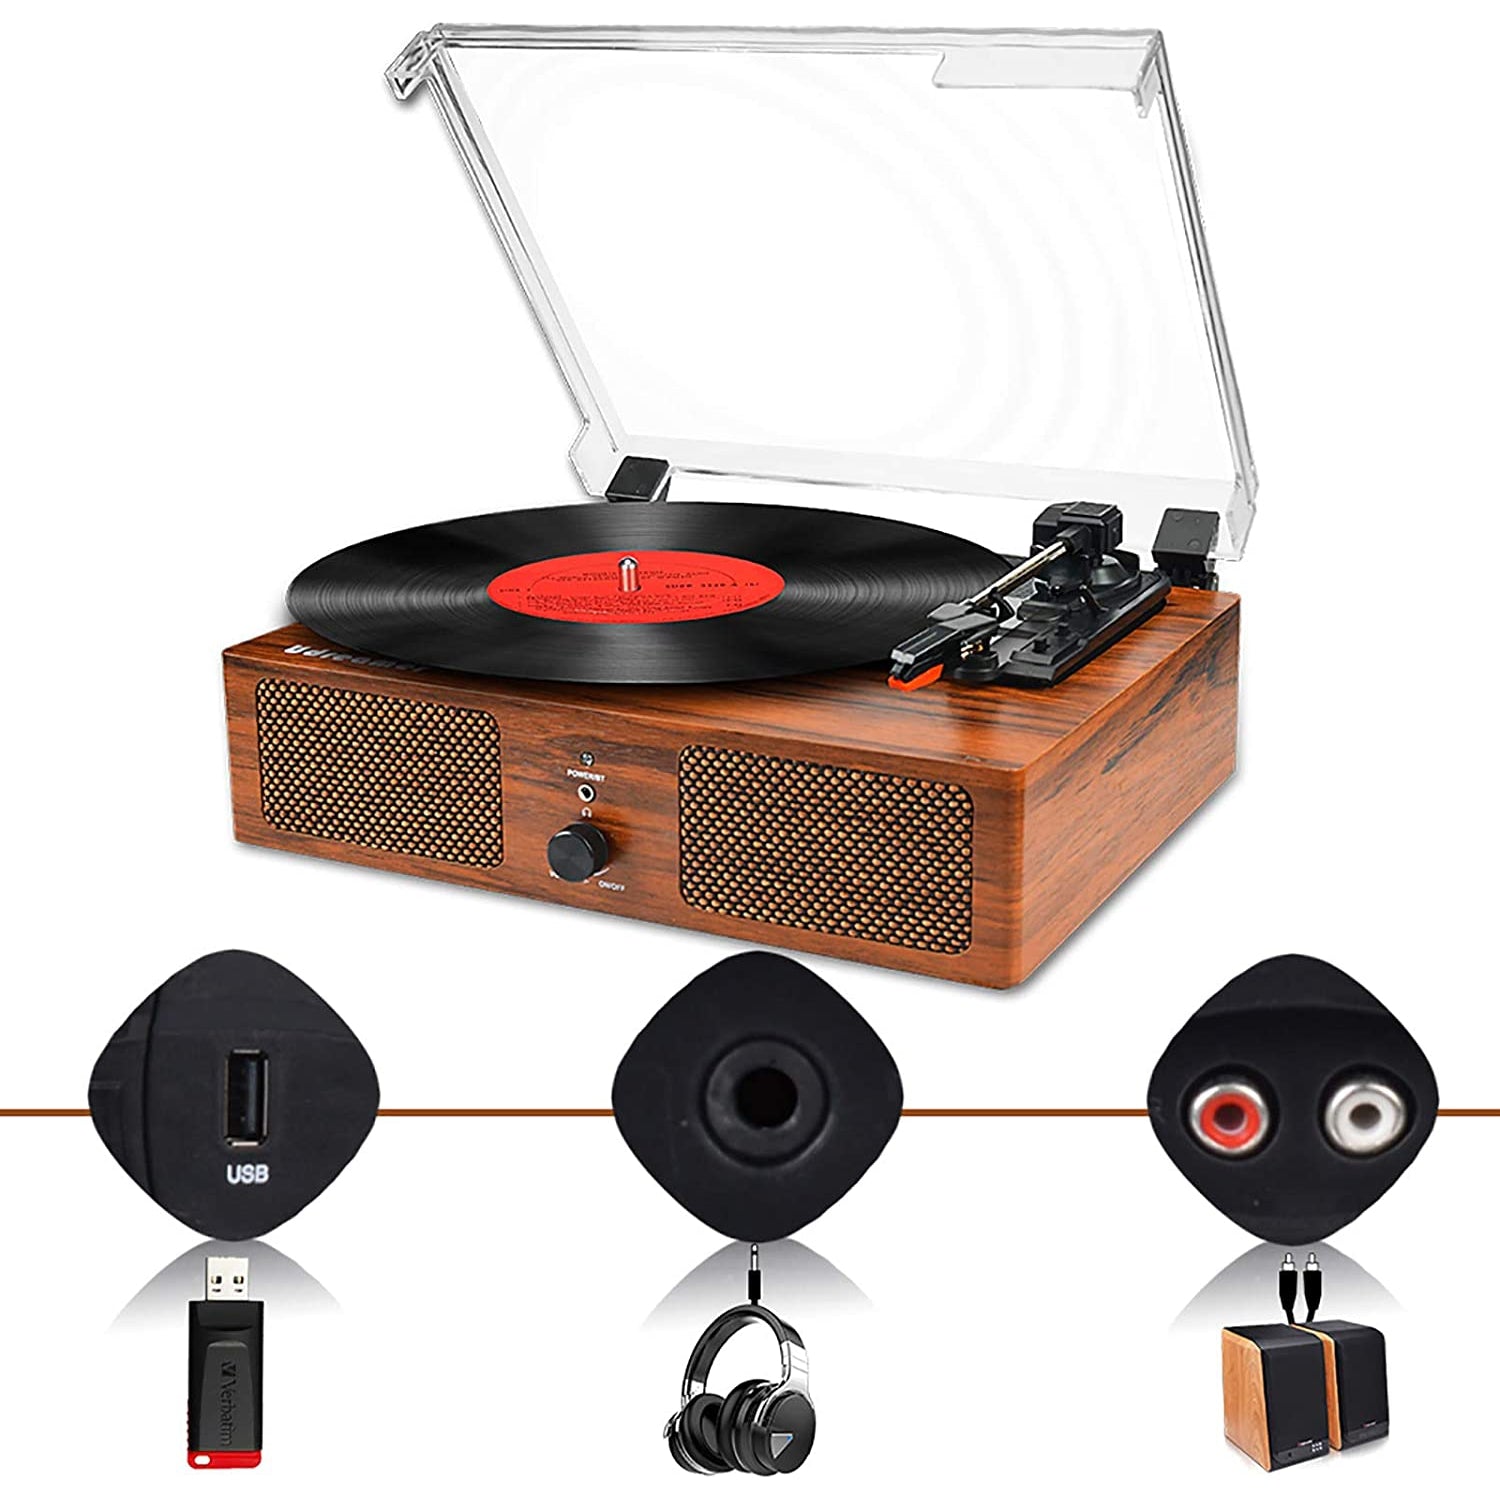 Udreamer Vinyl Record Player Bluetooth Turntable with Built-in Speakers, Brown / Claret